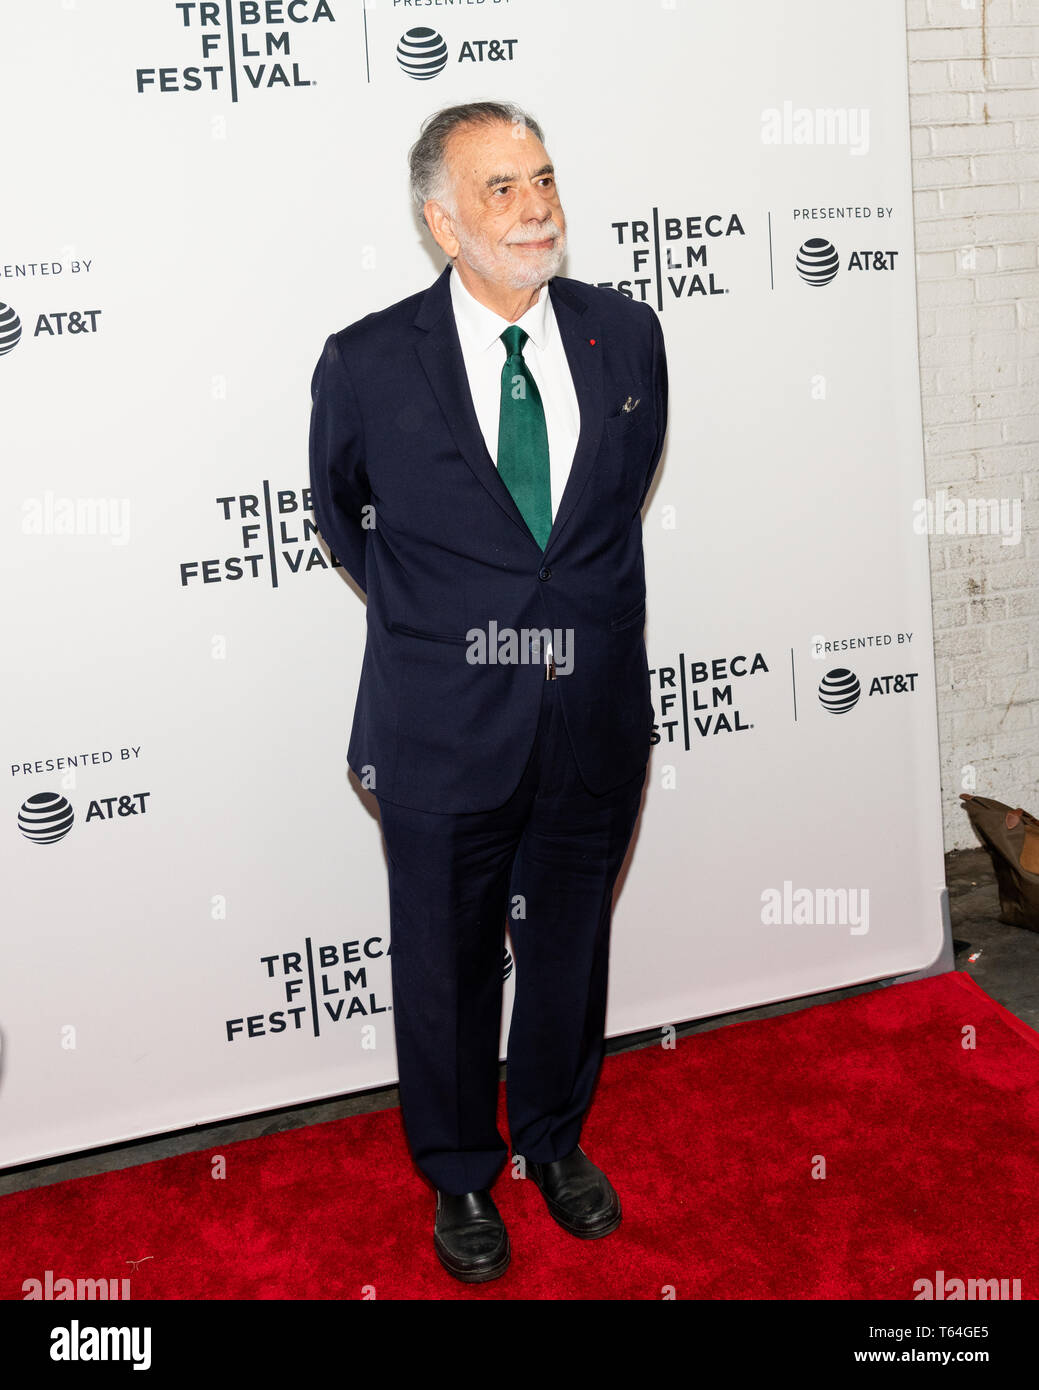 Francis Ford Coppola at the Tribeca Film Festival red carpet arrivals for 'Anniversary Film: Apocalypse Now - 40 years and restoration' at the Beacon Theatre in New York City. Stock Photo